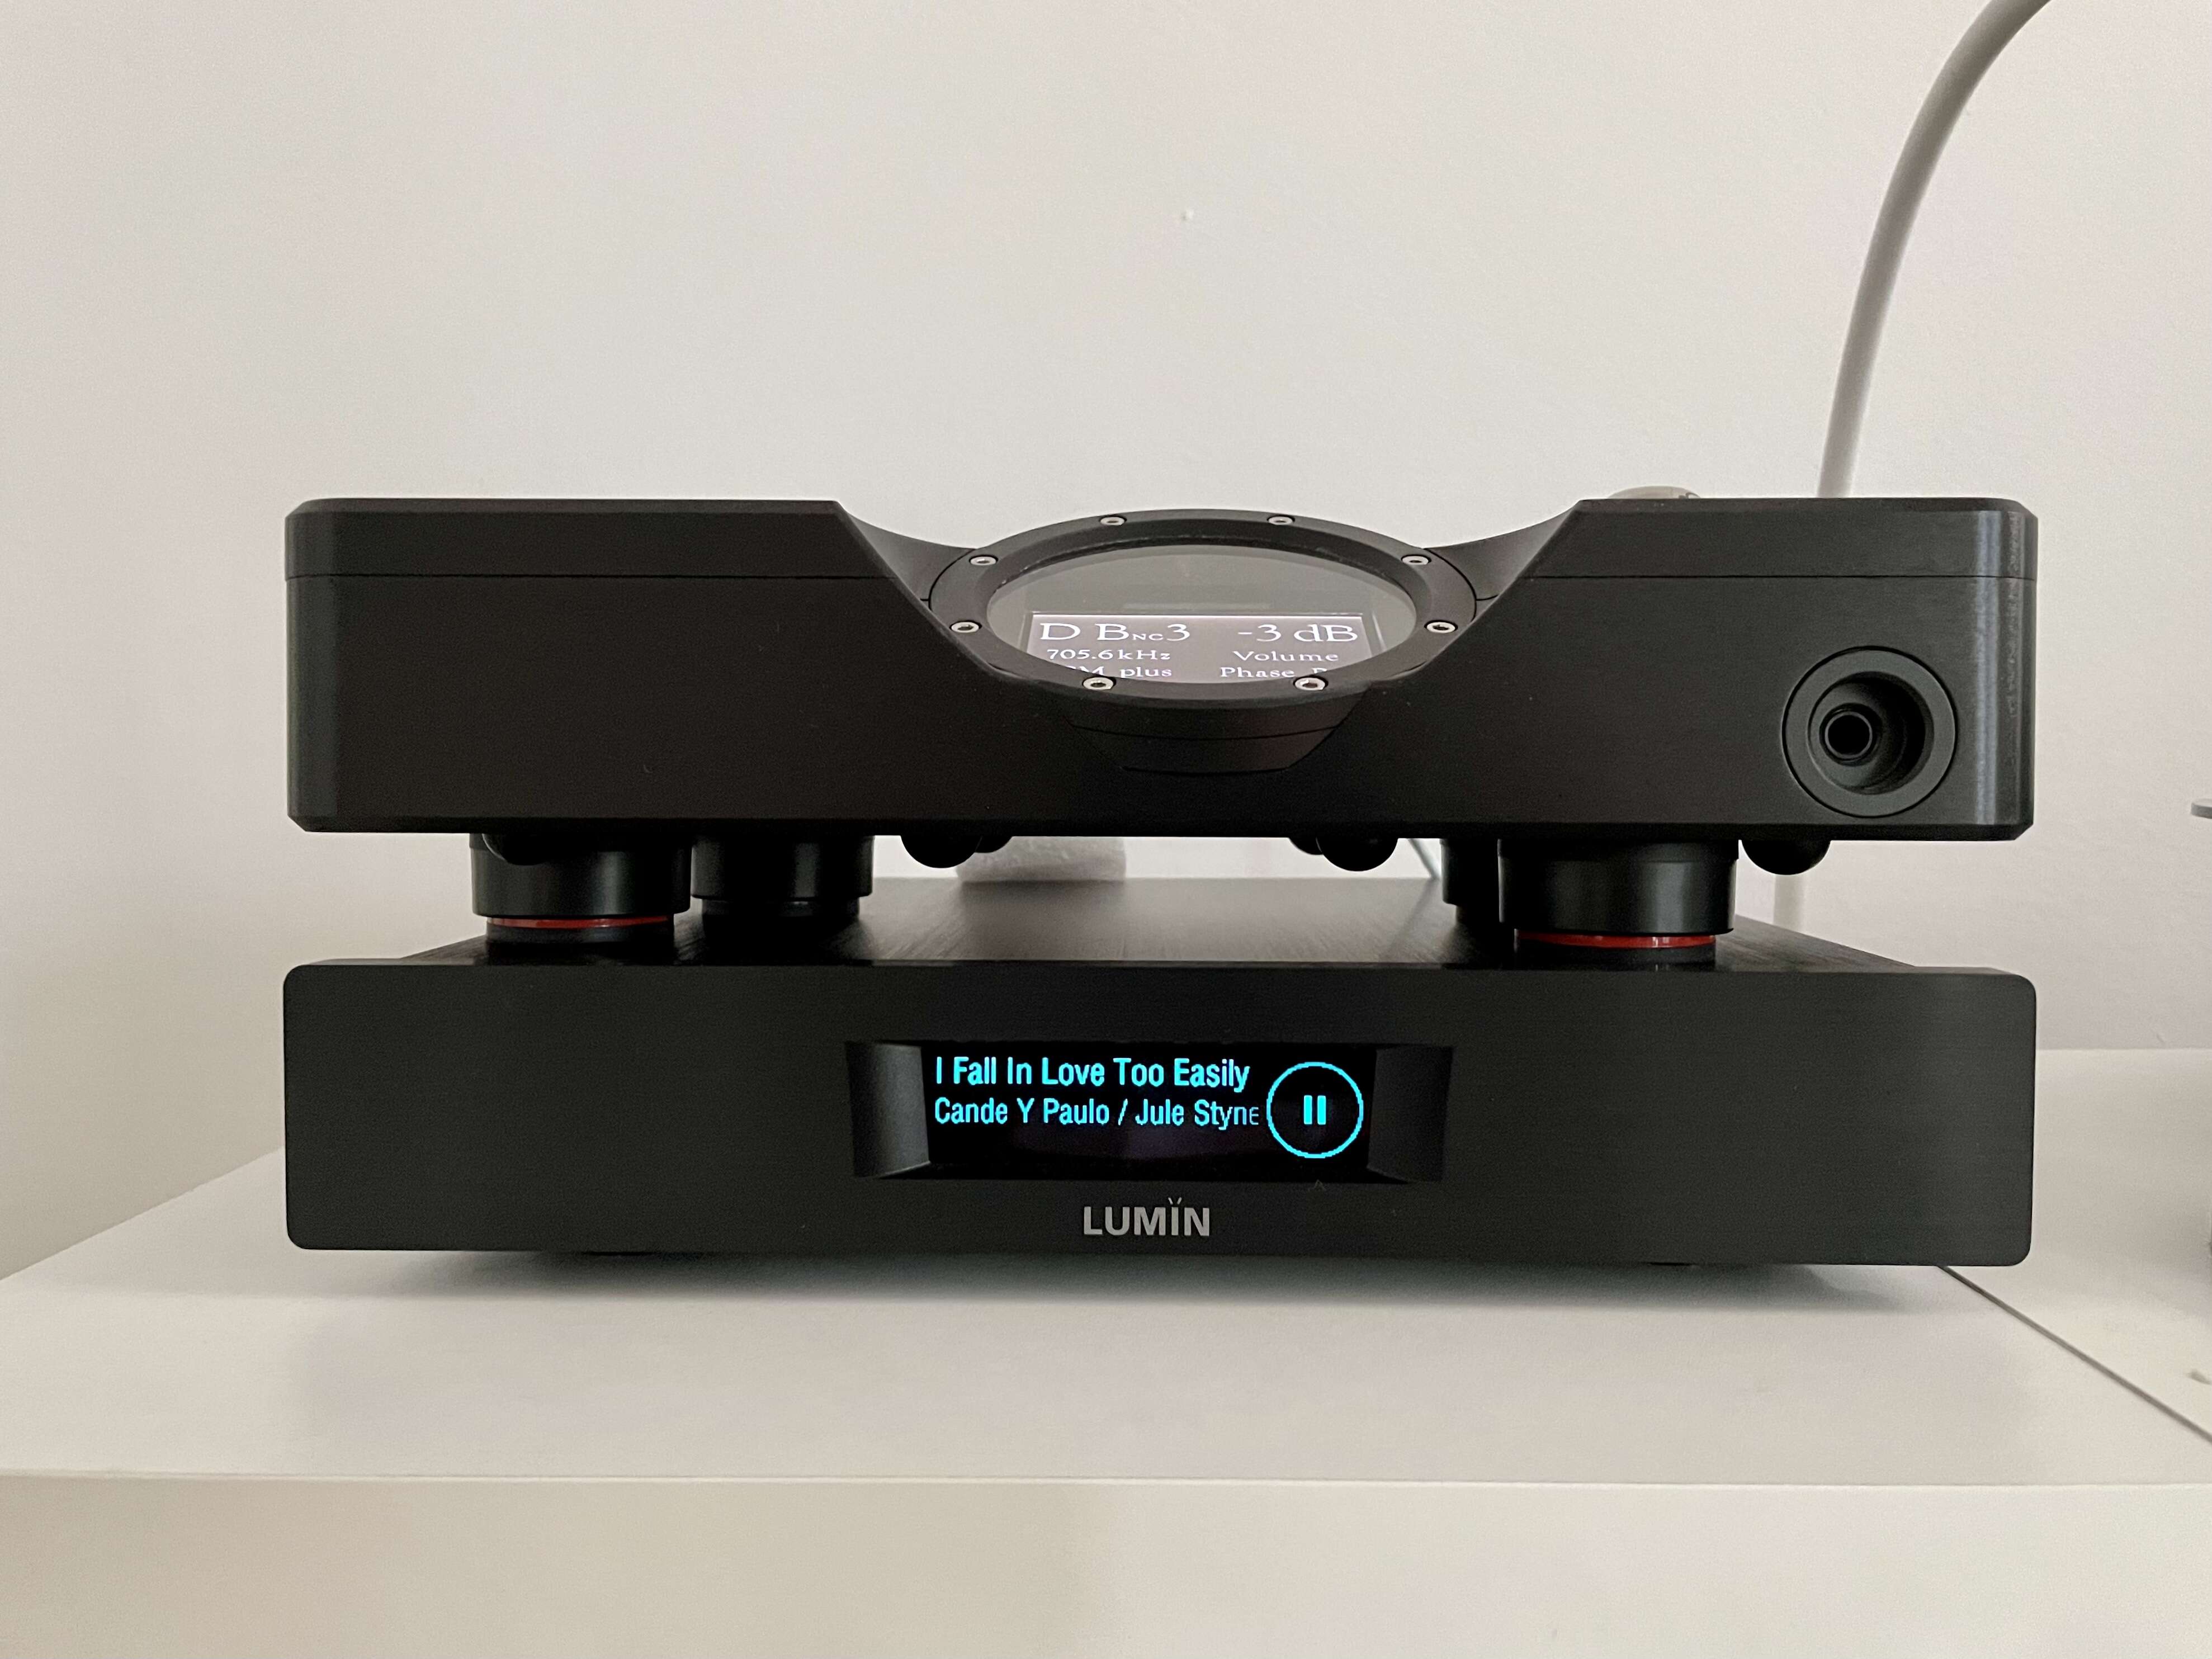 Roon Nucleus Network Streamer – Upscale Audio